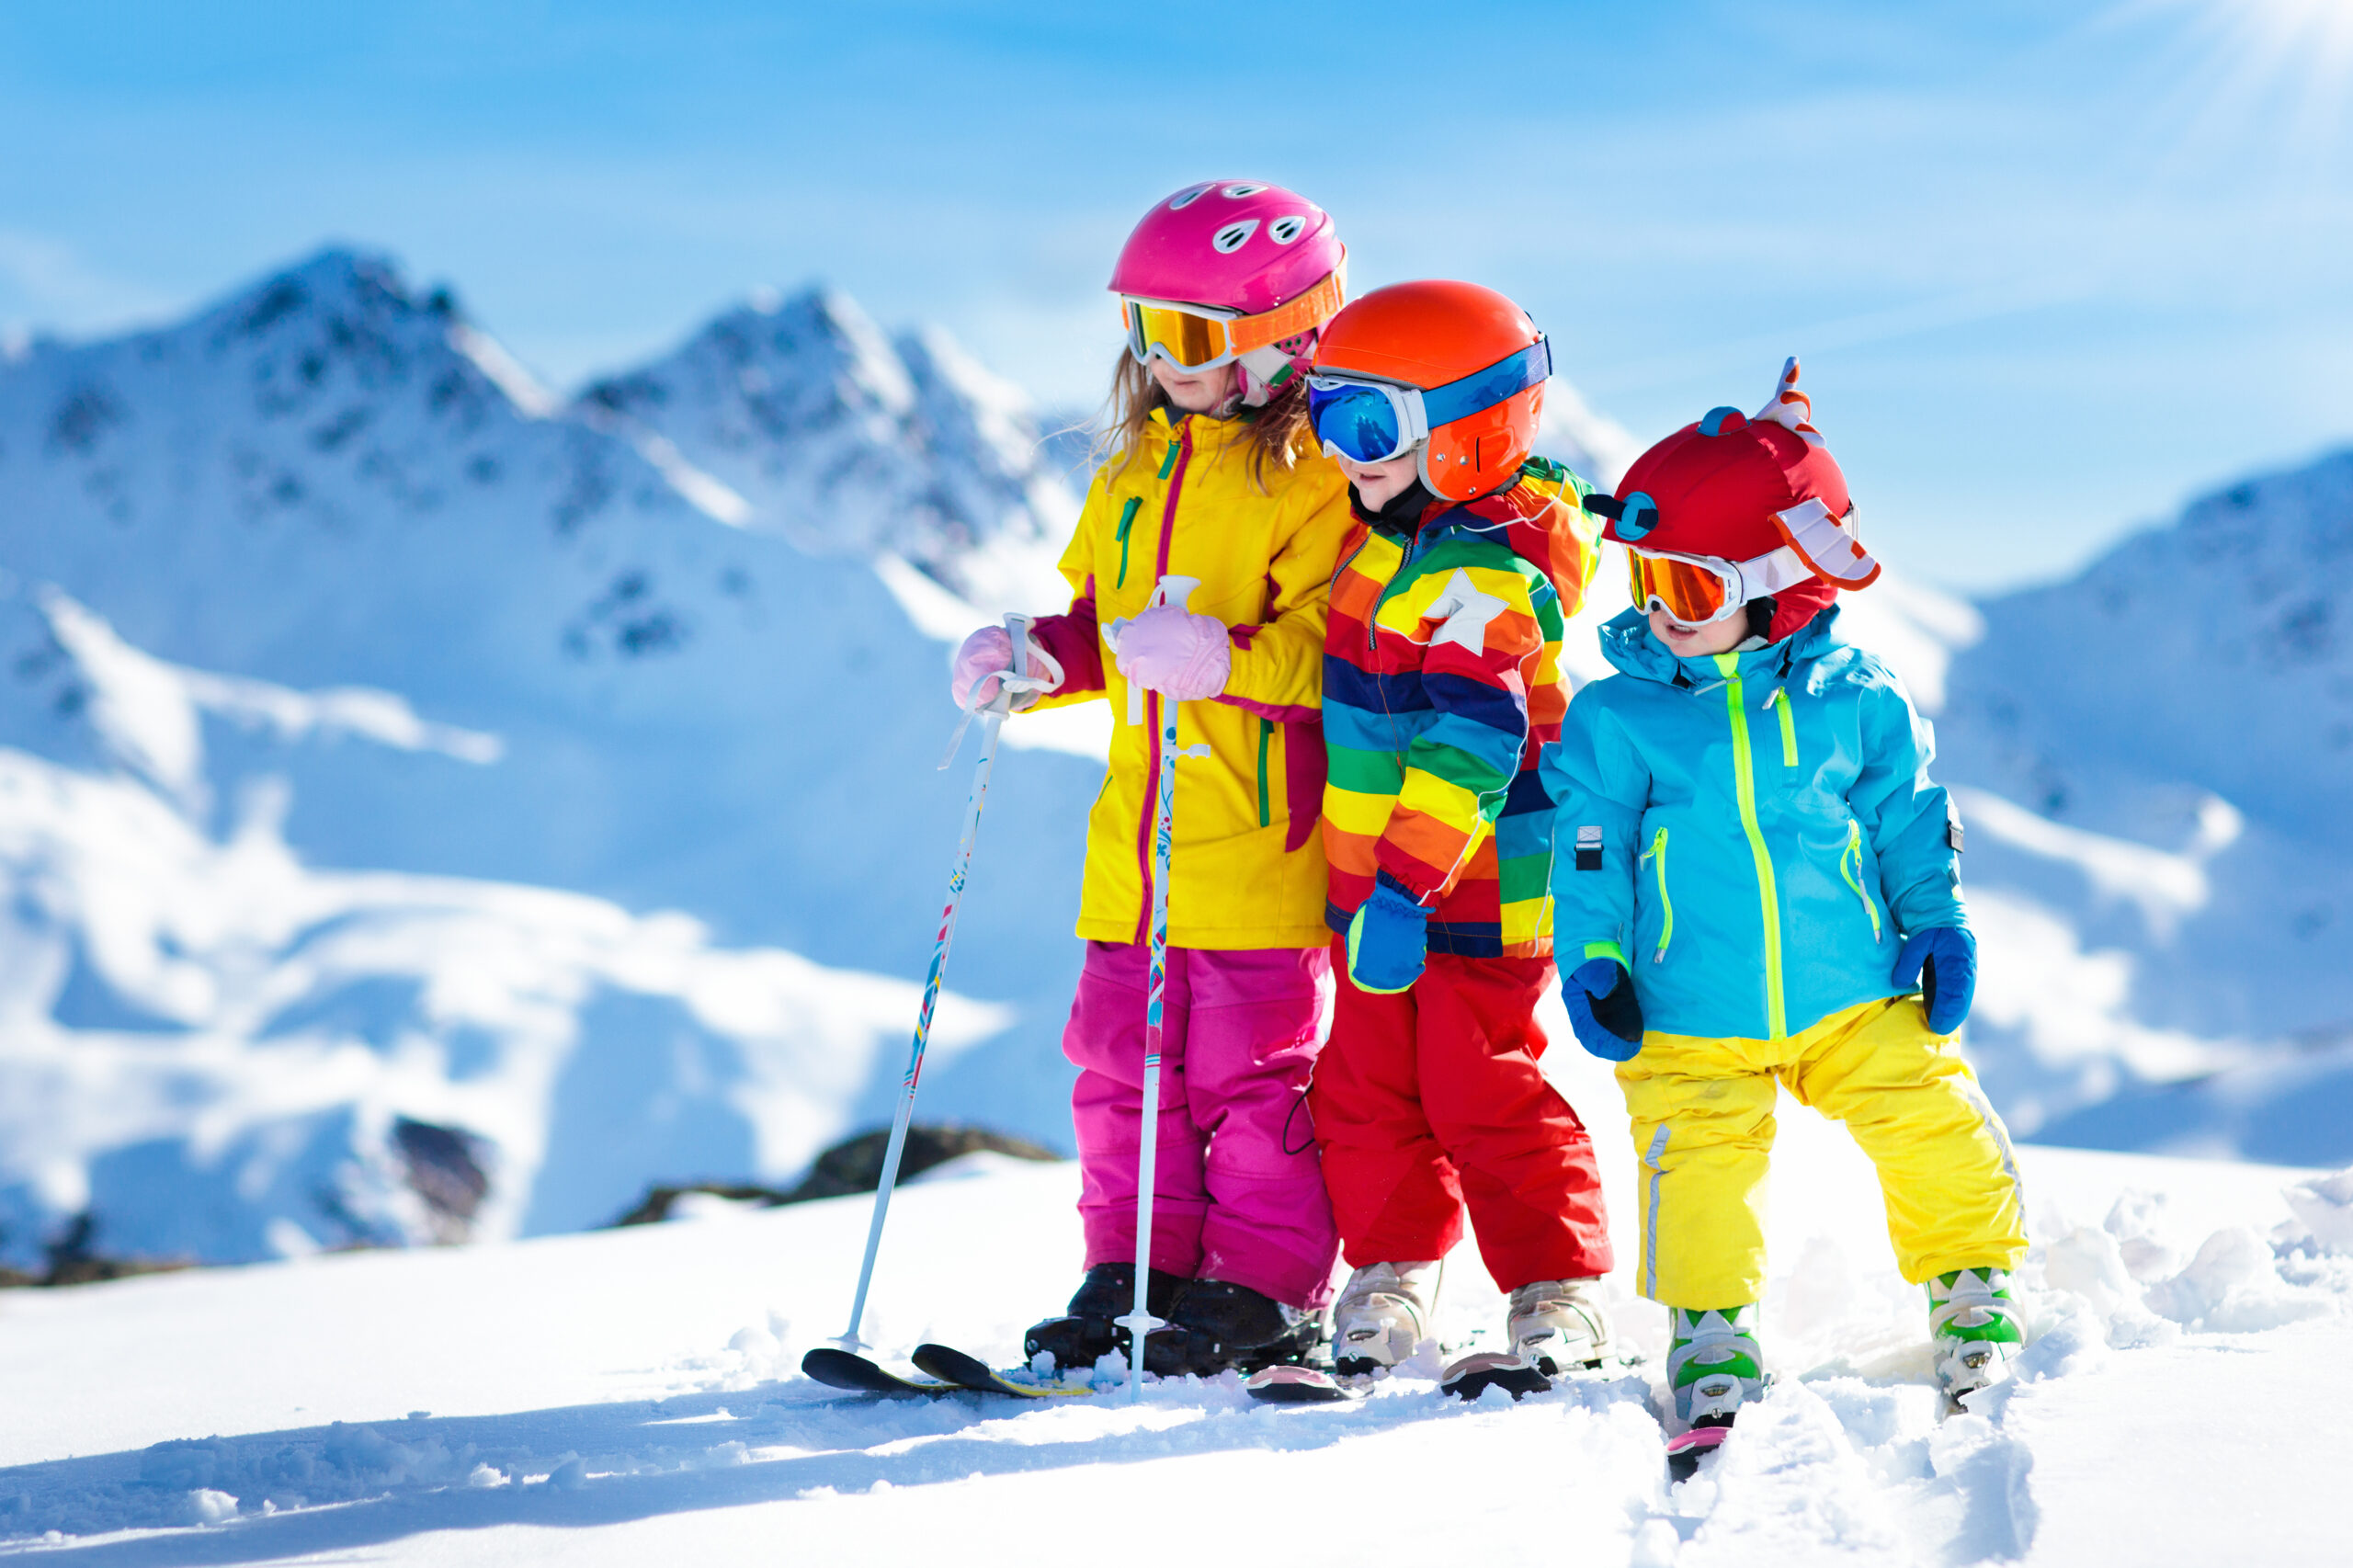 Children in bright colored clothing on a ski slope